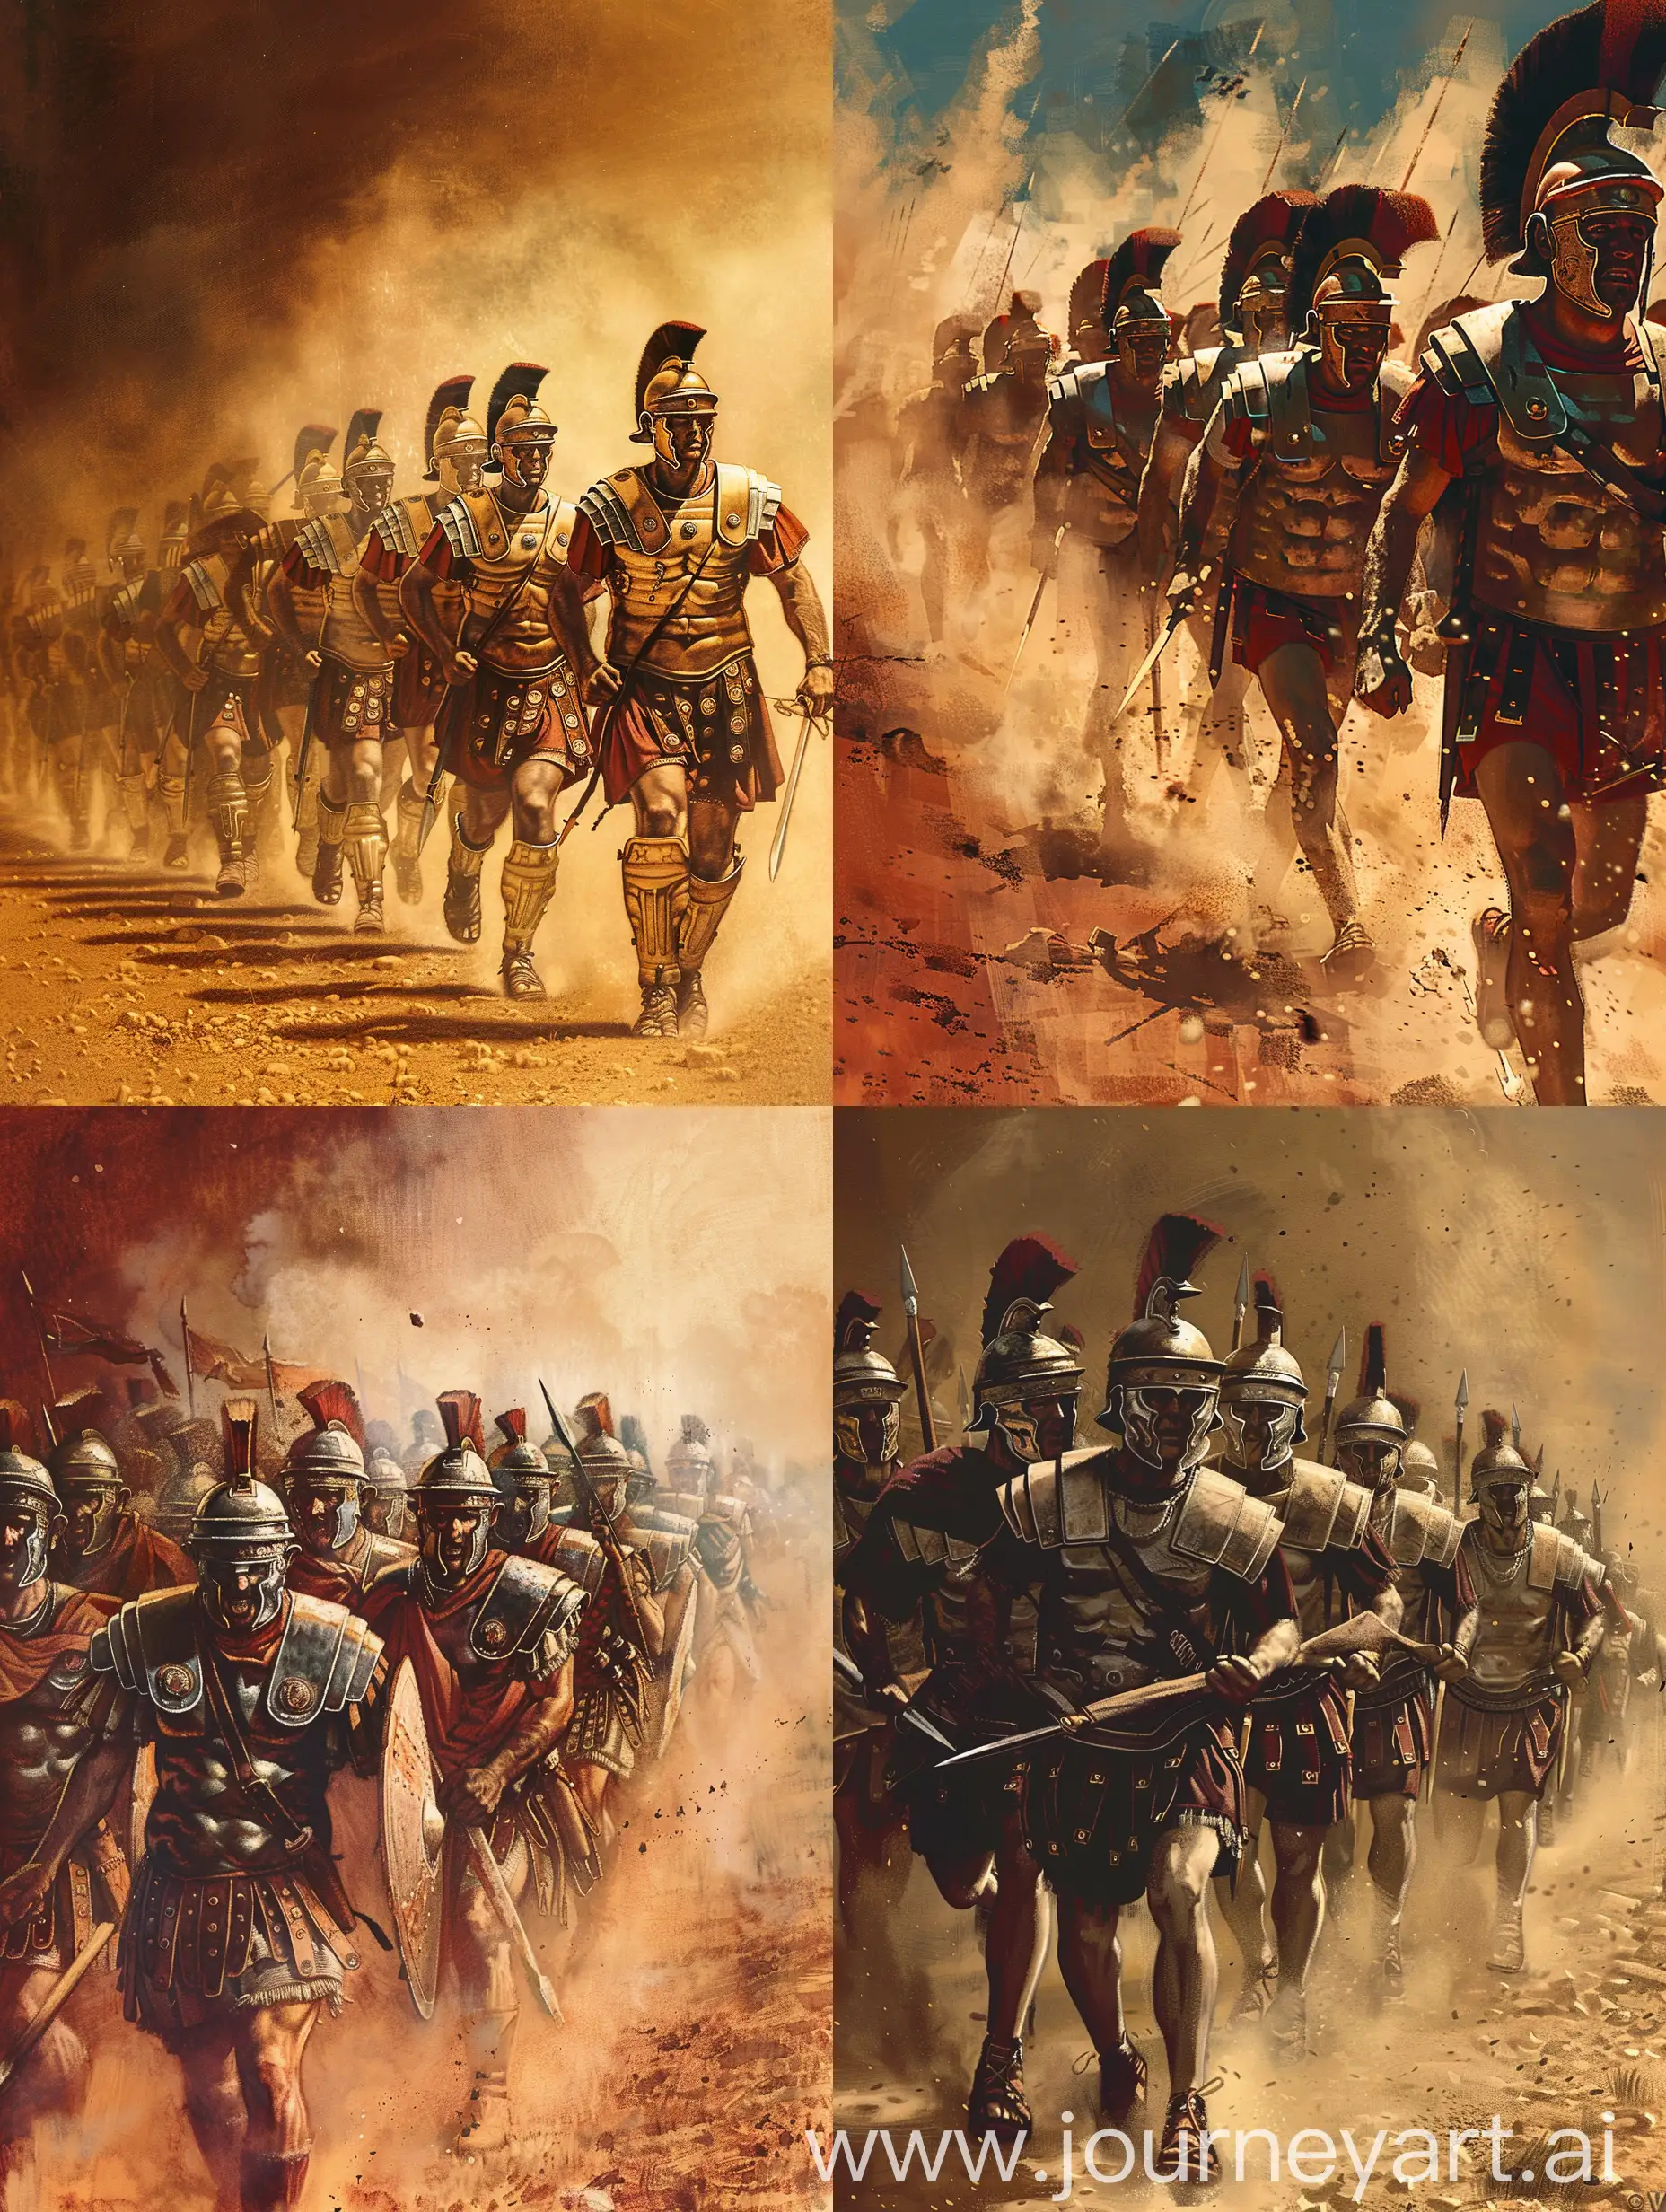 Roman-Soldiers-Marching-in-Dusty-Battlefield-Action-Illustration-by-Aaron-Horkey